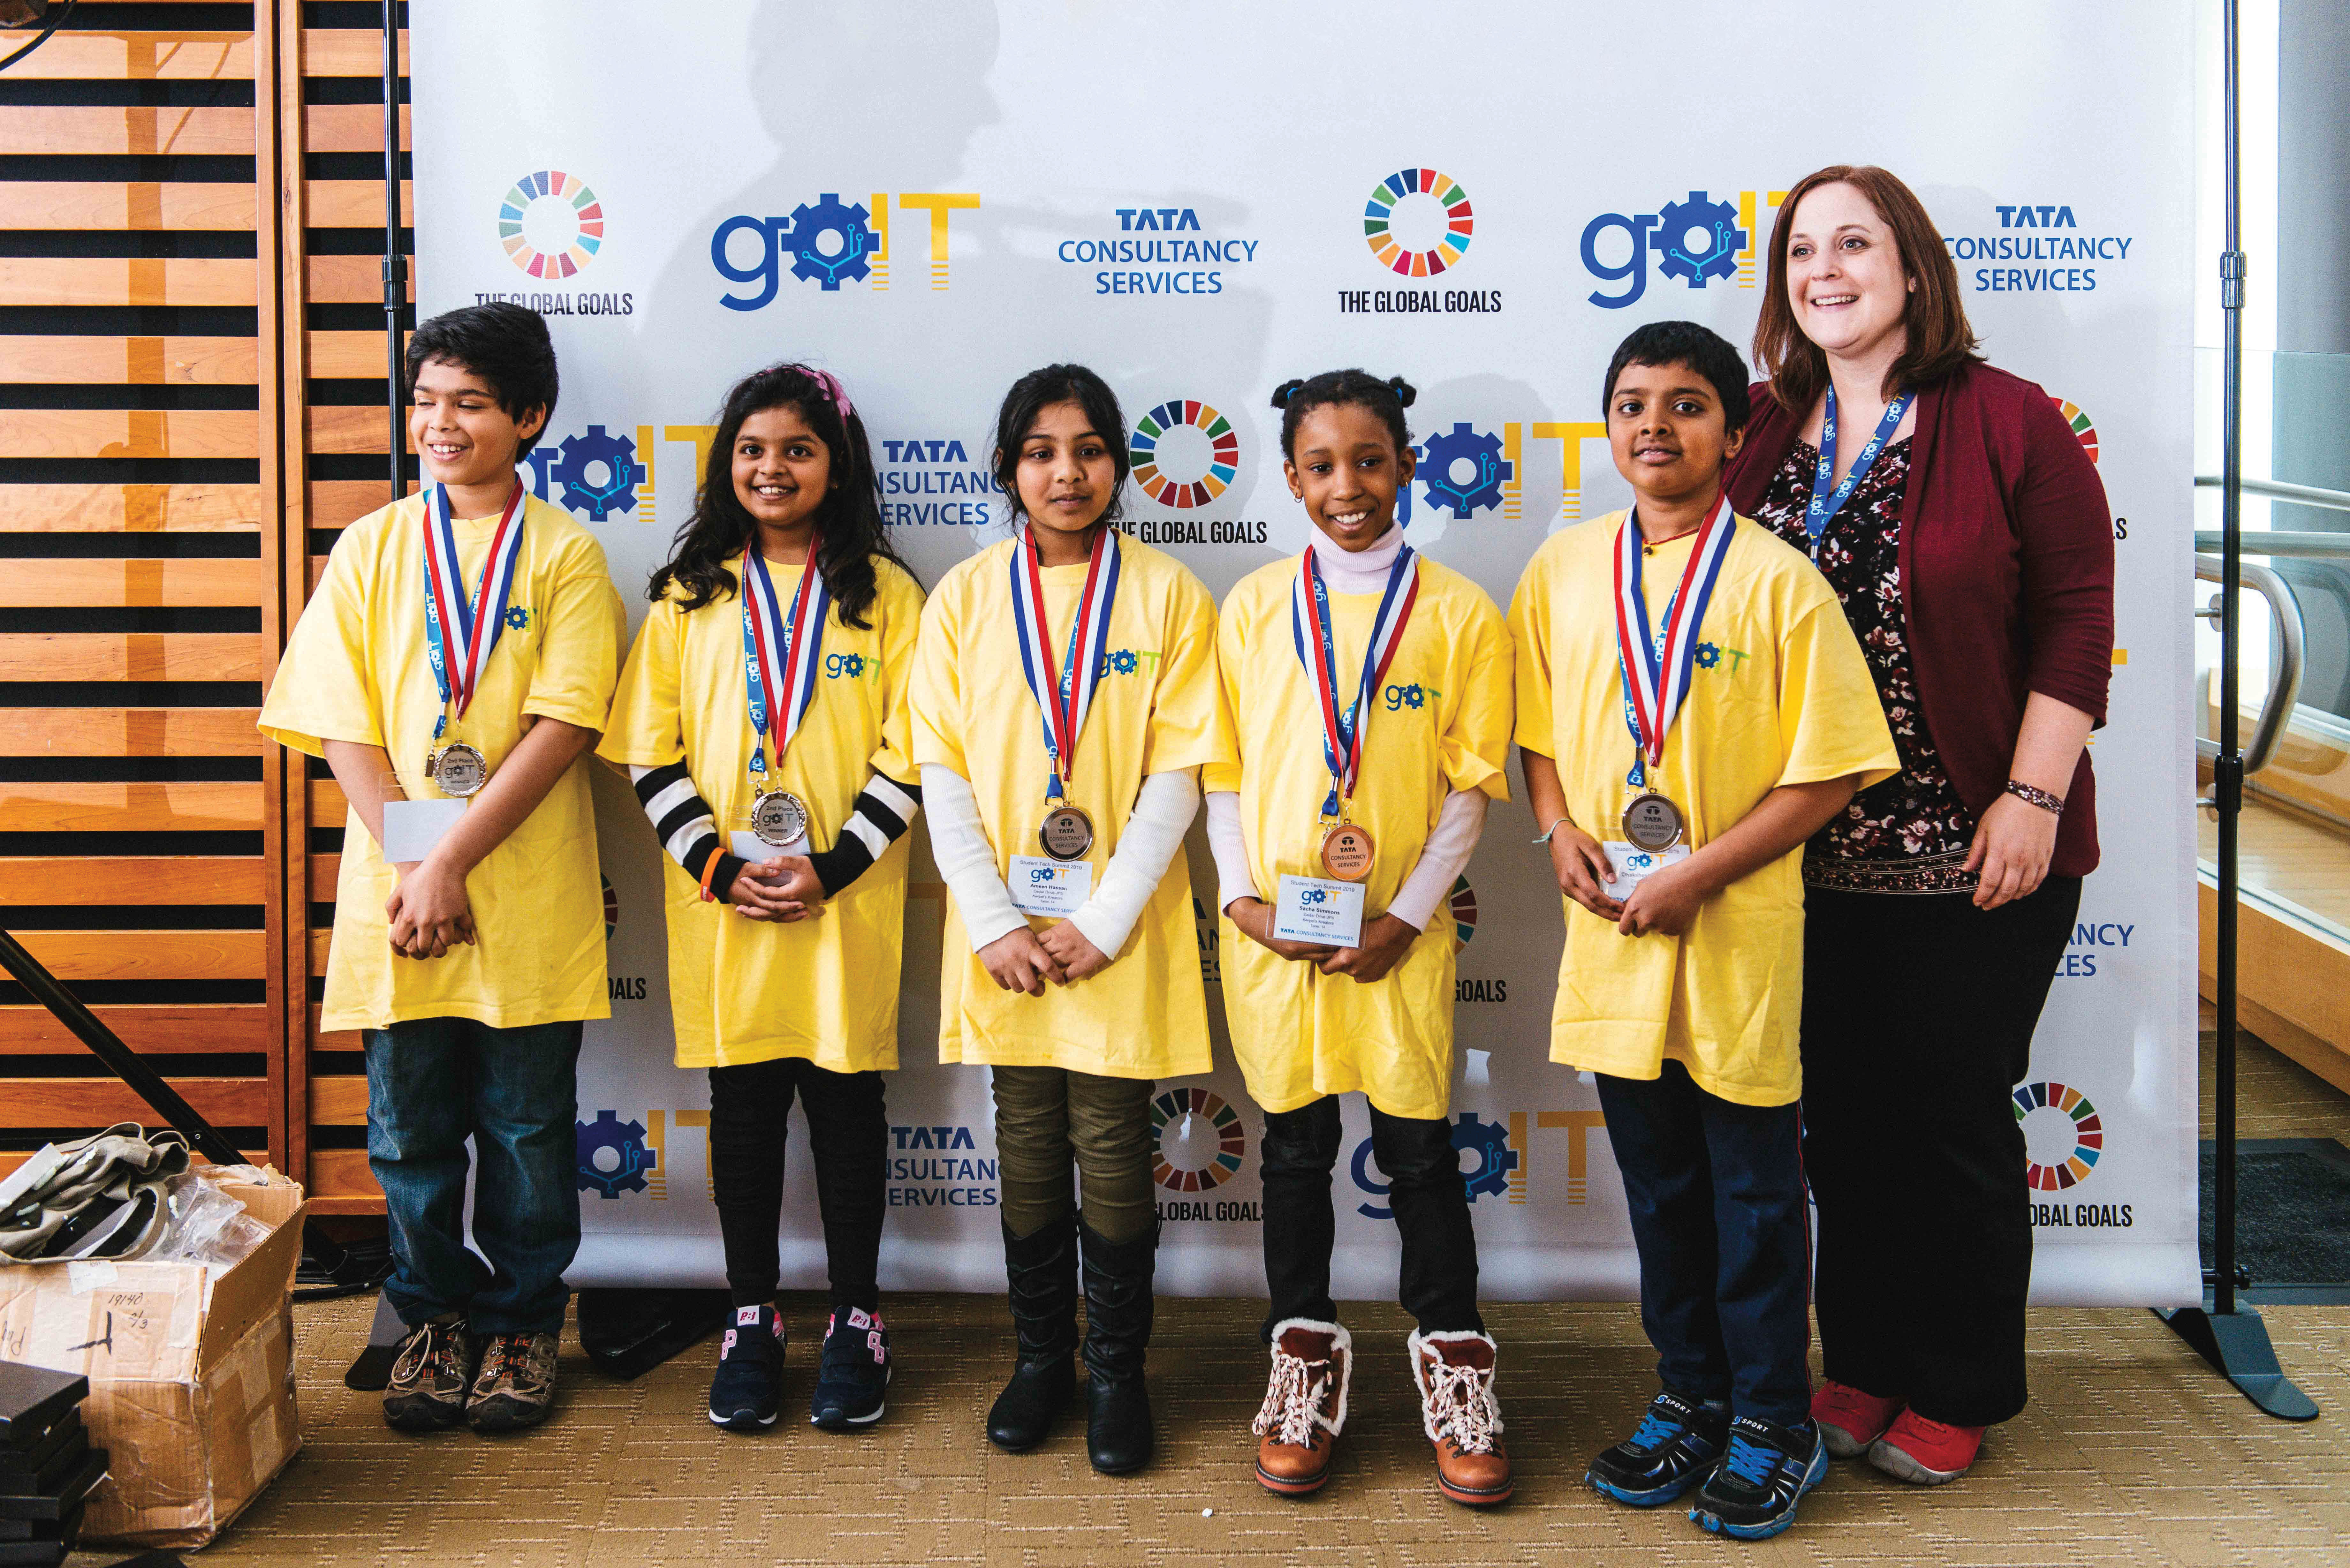 Photo of Laura Kerpel, OCT, a Grade 3 teacher at Cedar Drive Junior Public School, smiling with students who are wearing award medals around their necks.